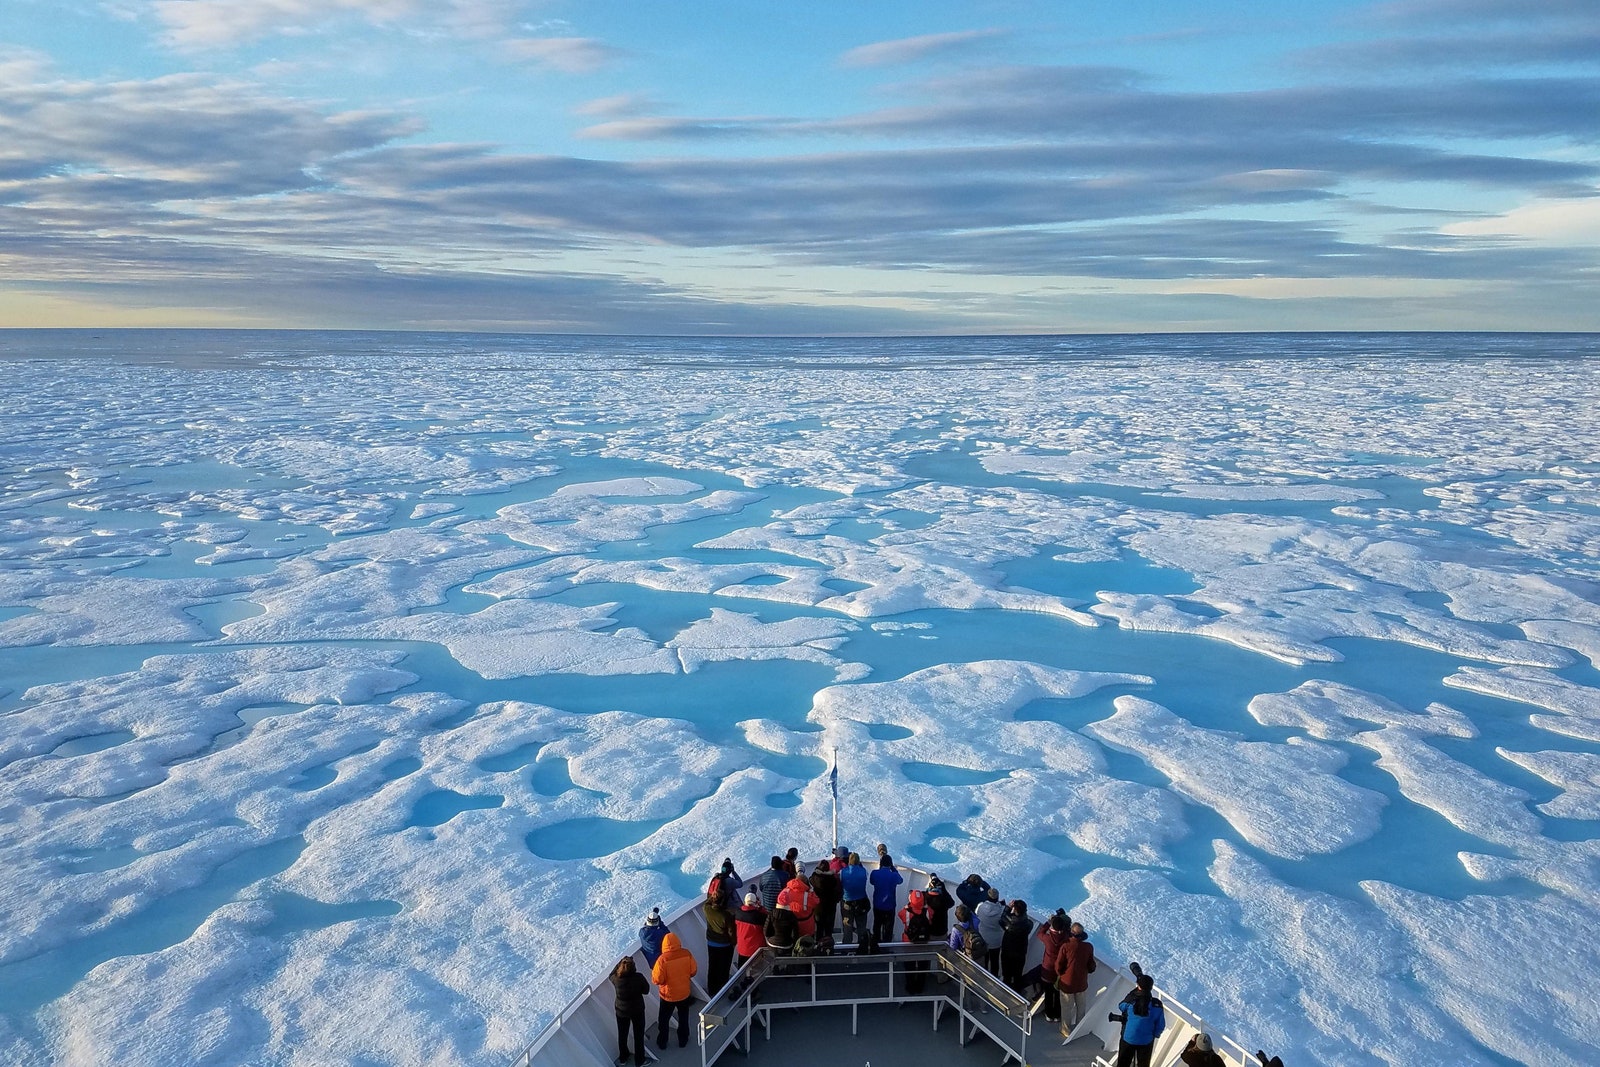 Looking out over a frozen Baffin Bay in the Arctic Archipelago. Outdoors Nature Ice Mountain Transportation Vehicle...